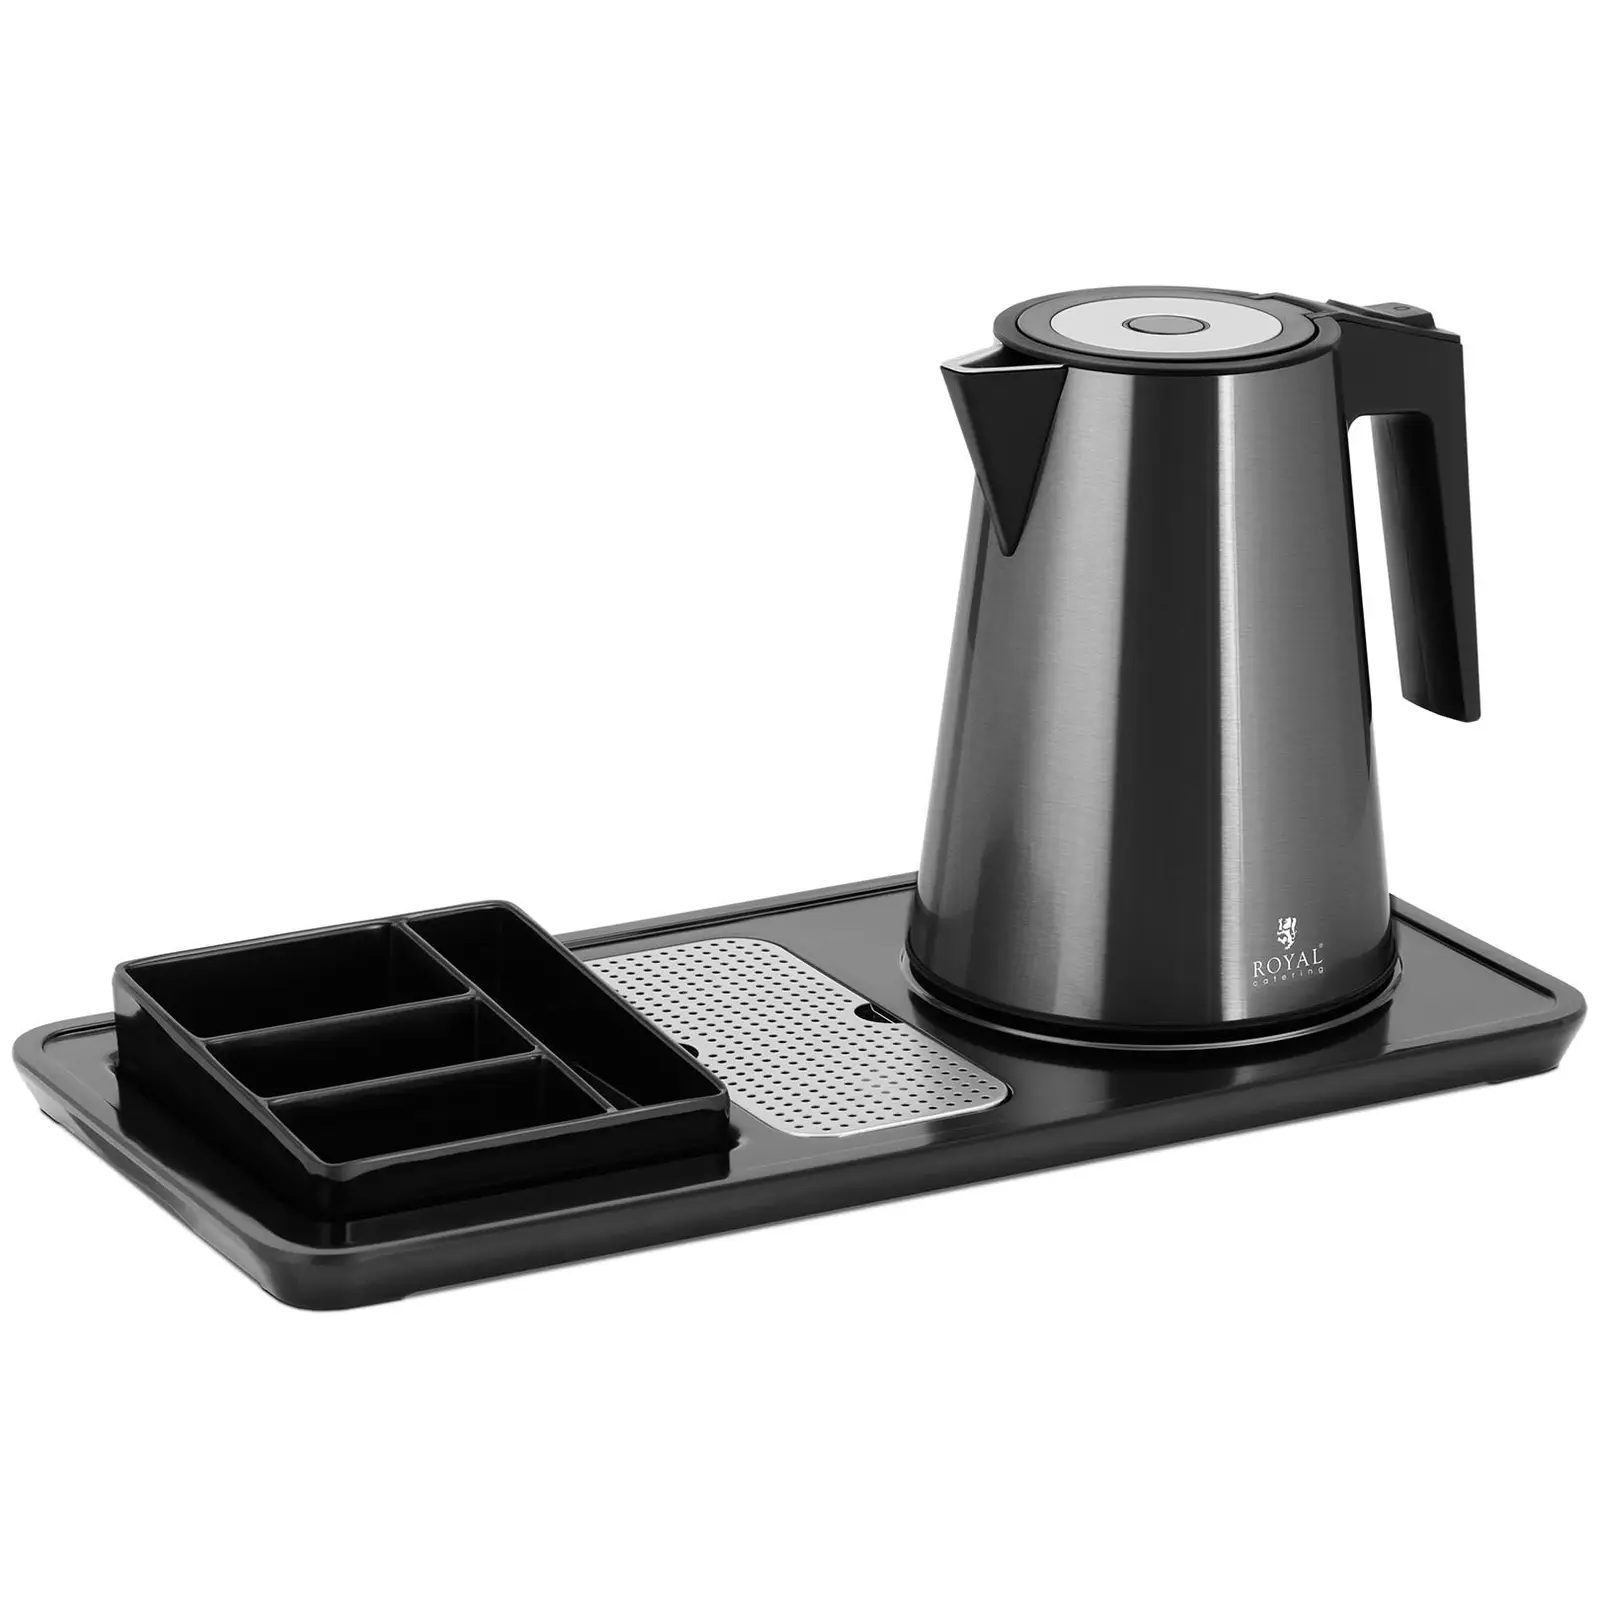 Kettle - Coffee and tea station - 1.2 L - 1800 W - black - Royal Catering